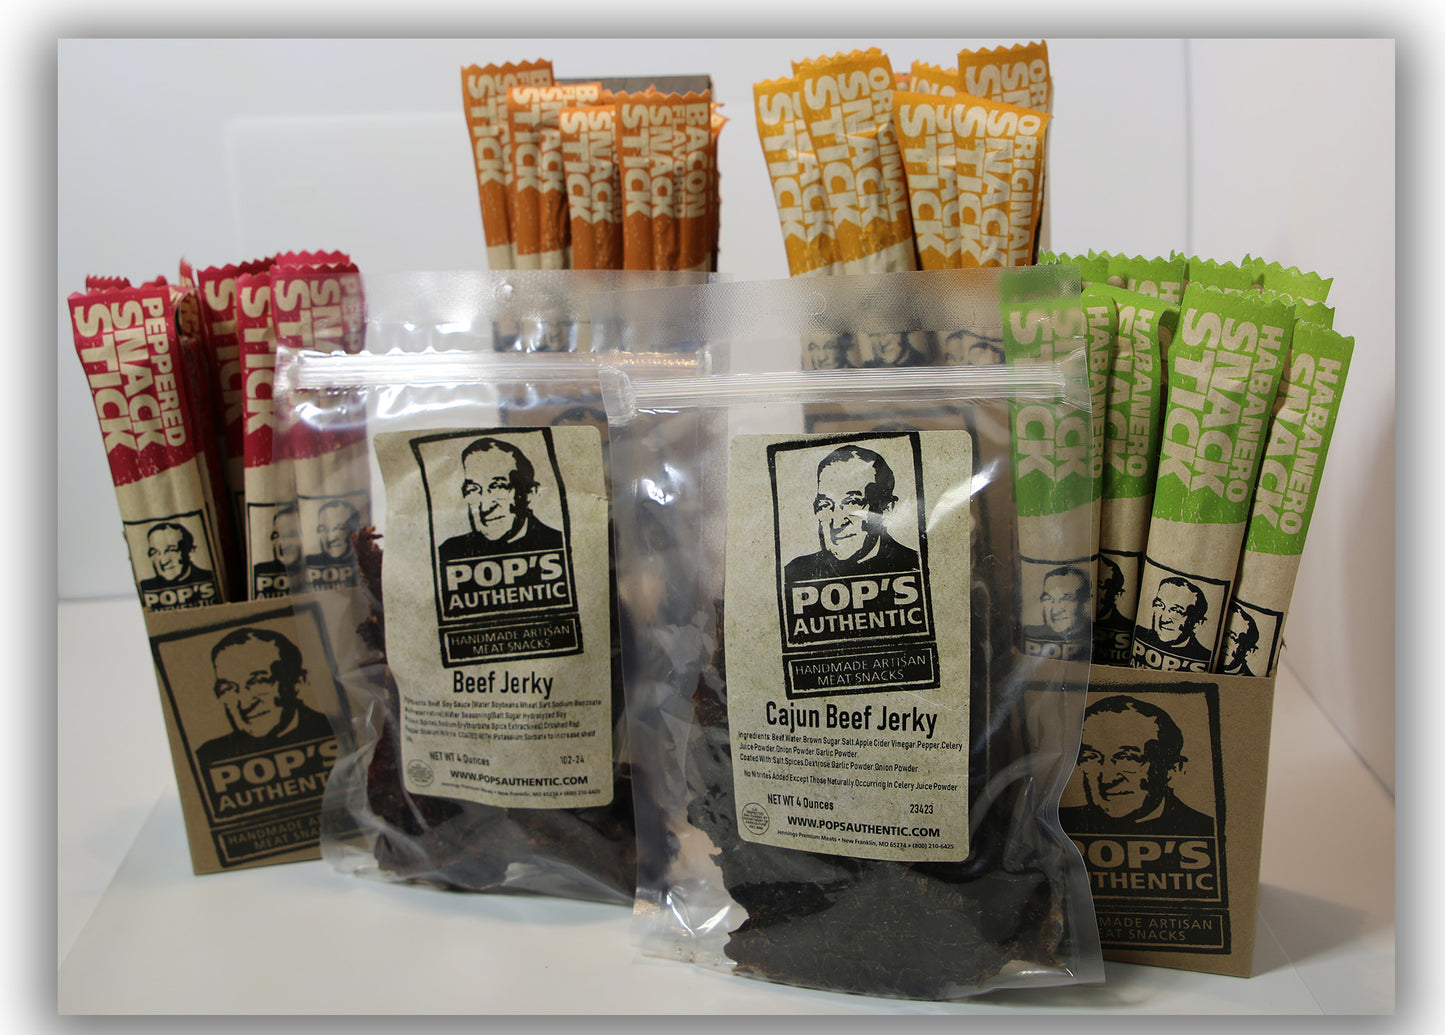 All-in-One Sampler of Snack Sticks and jerky flavors